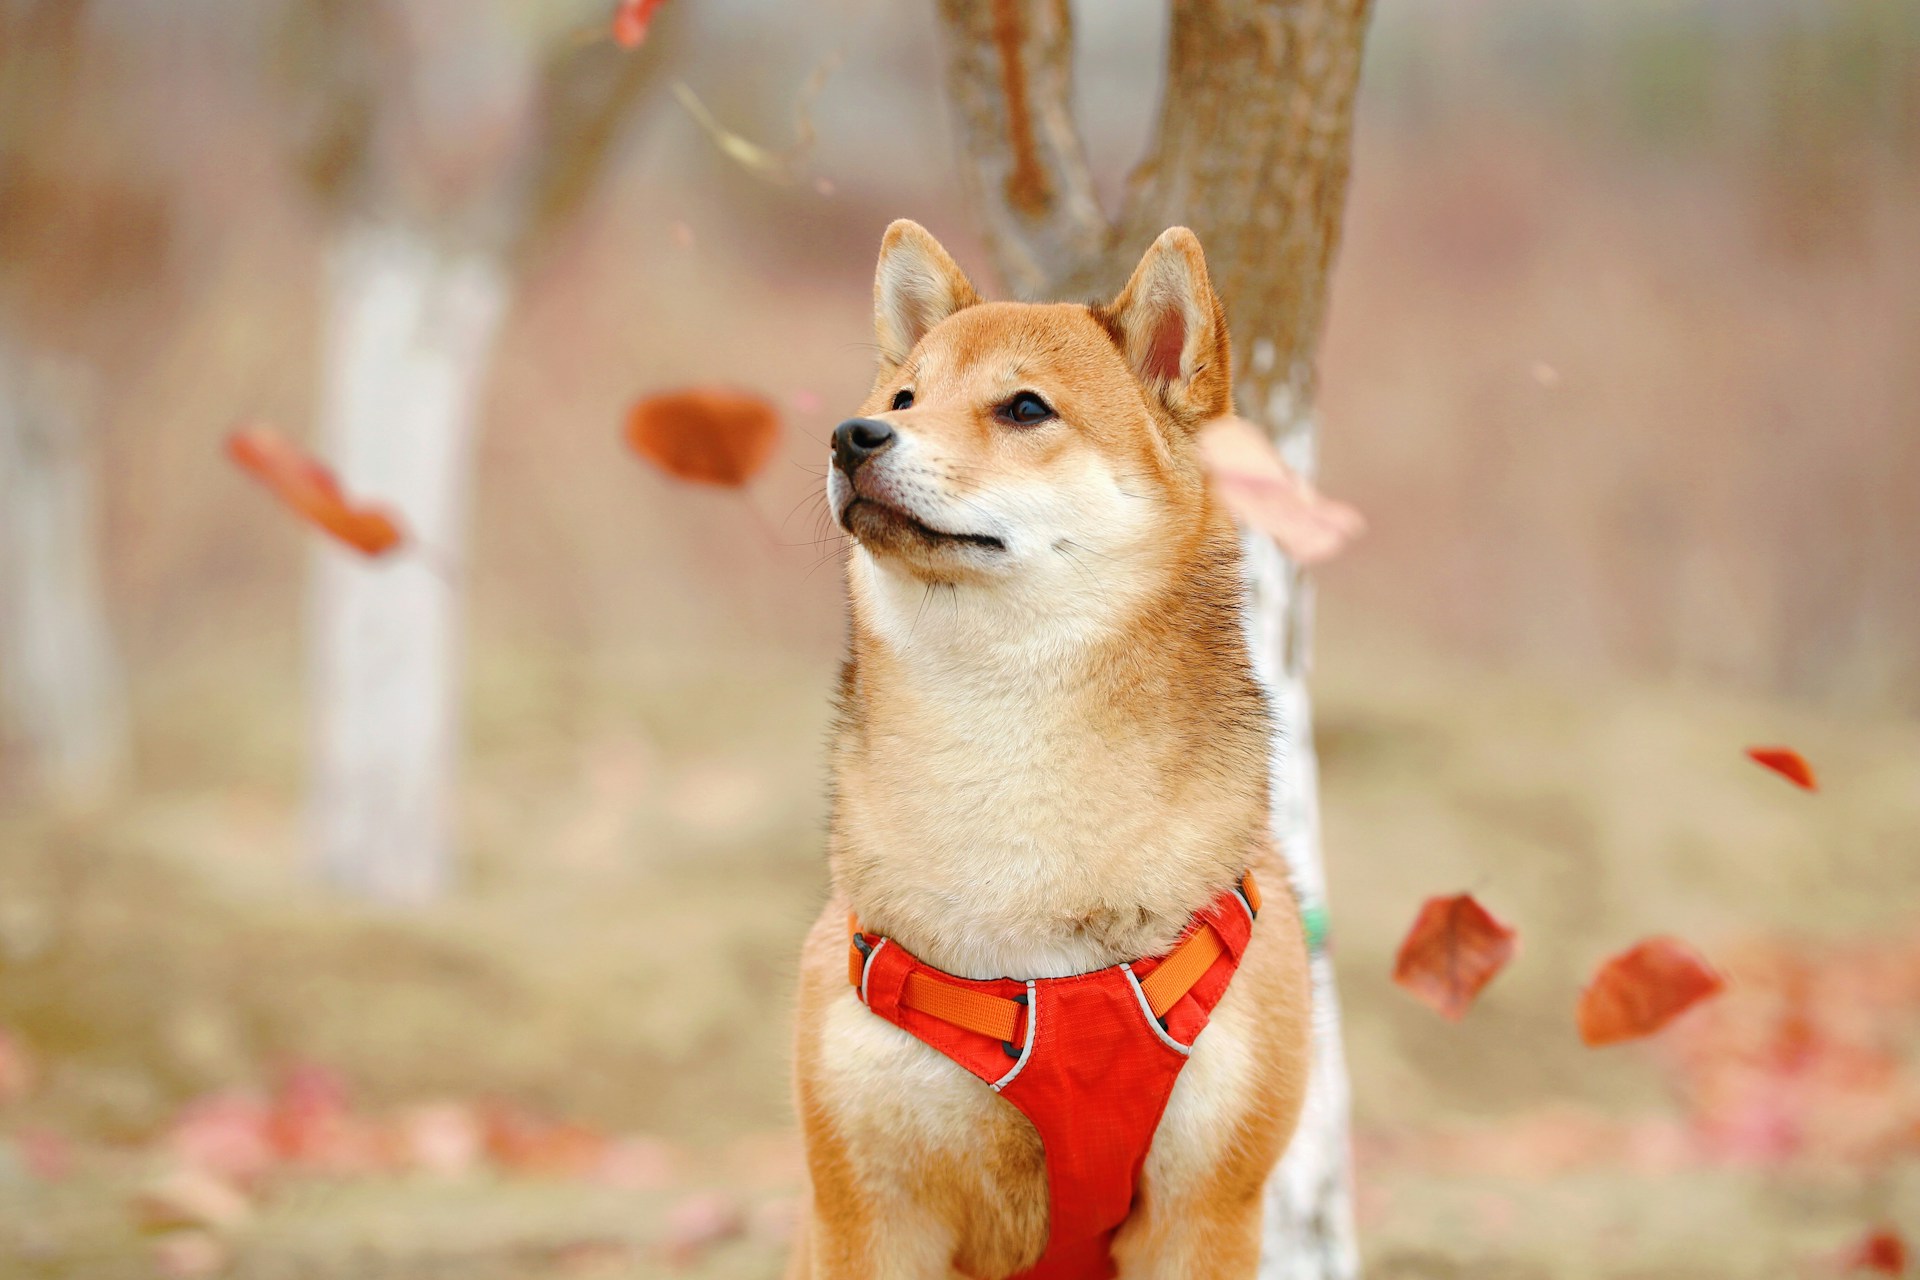 A Shiba Inu sitting outdoors surrounded by falling leaves